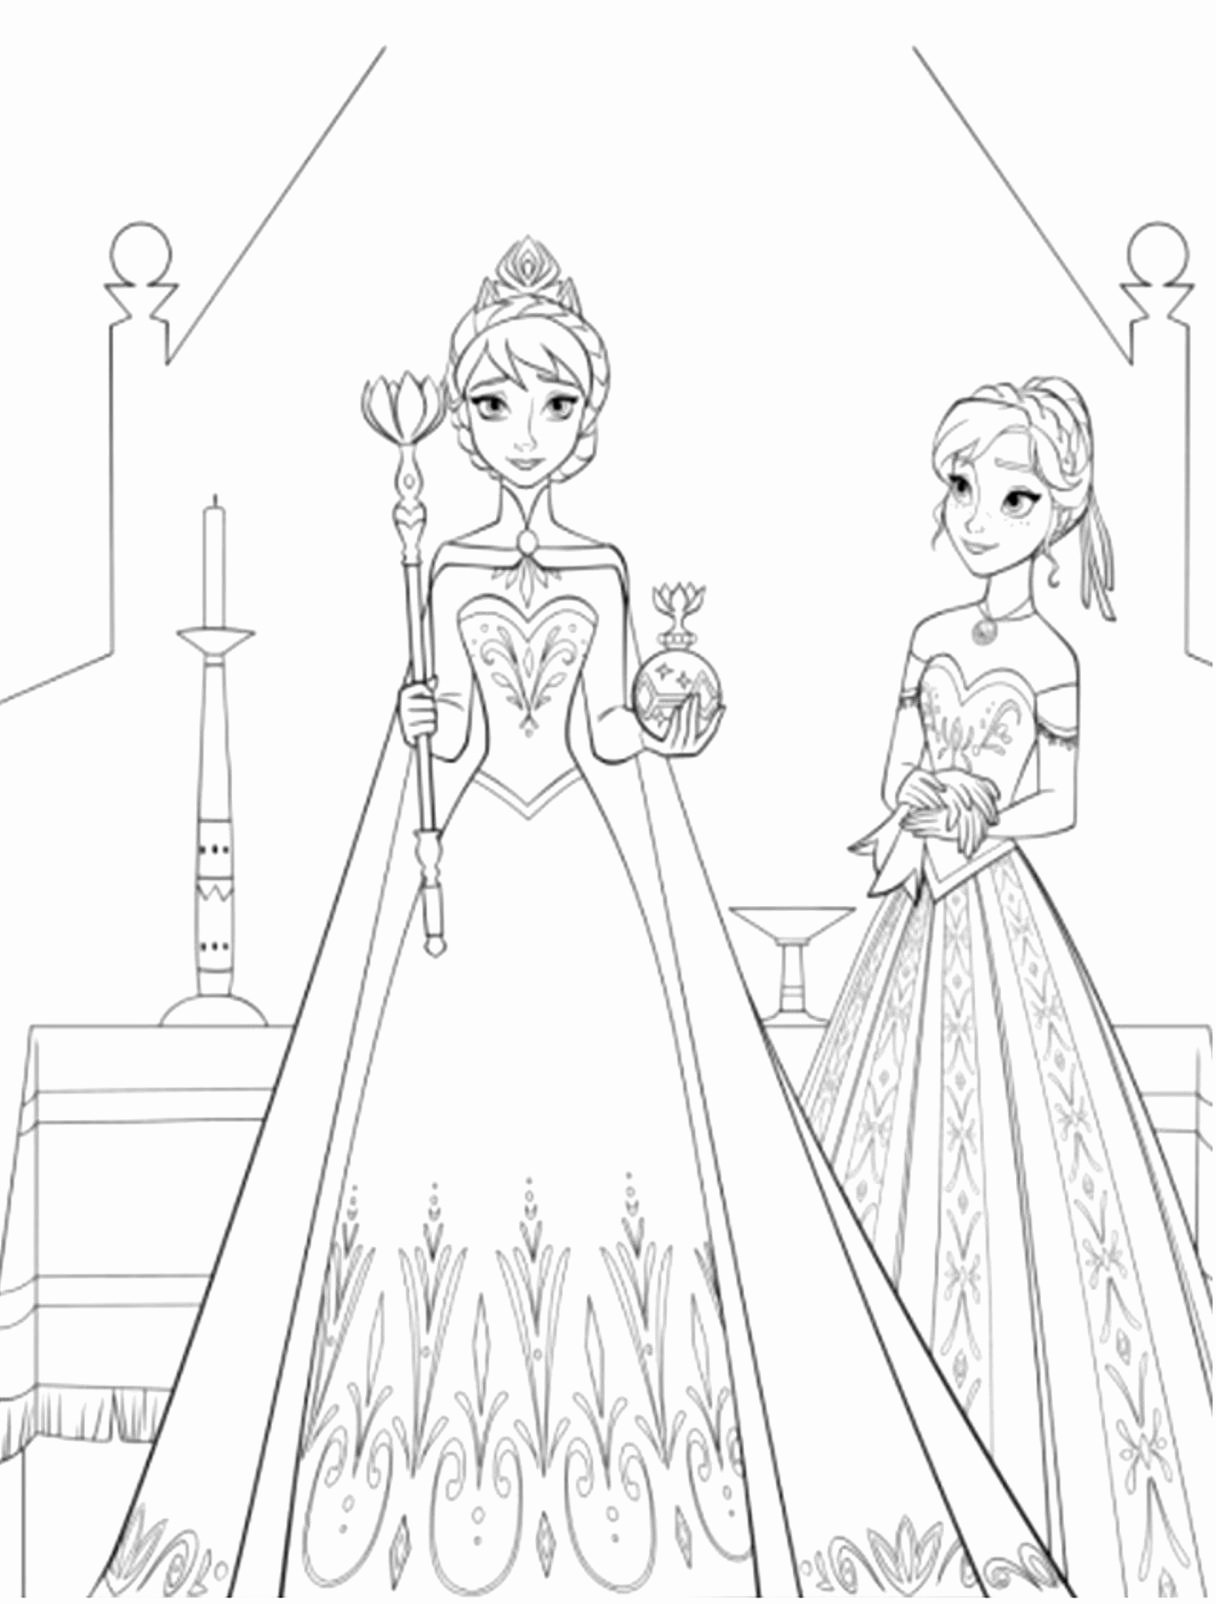 Frozen Fever Elsa Coloring Pages at GetDrawings.com | Free ...